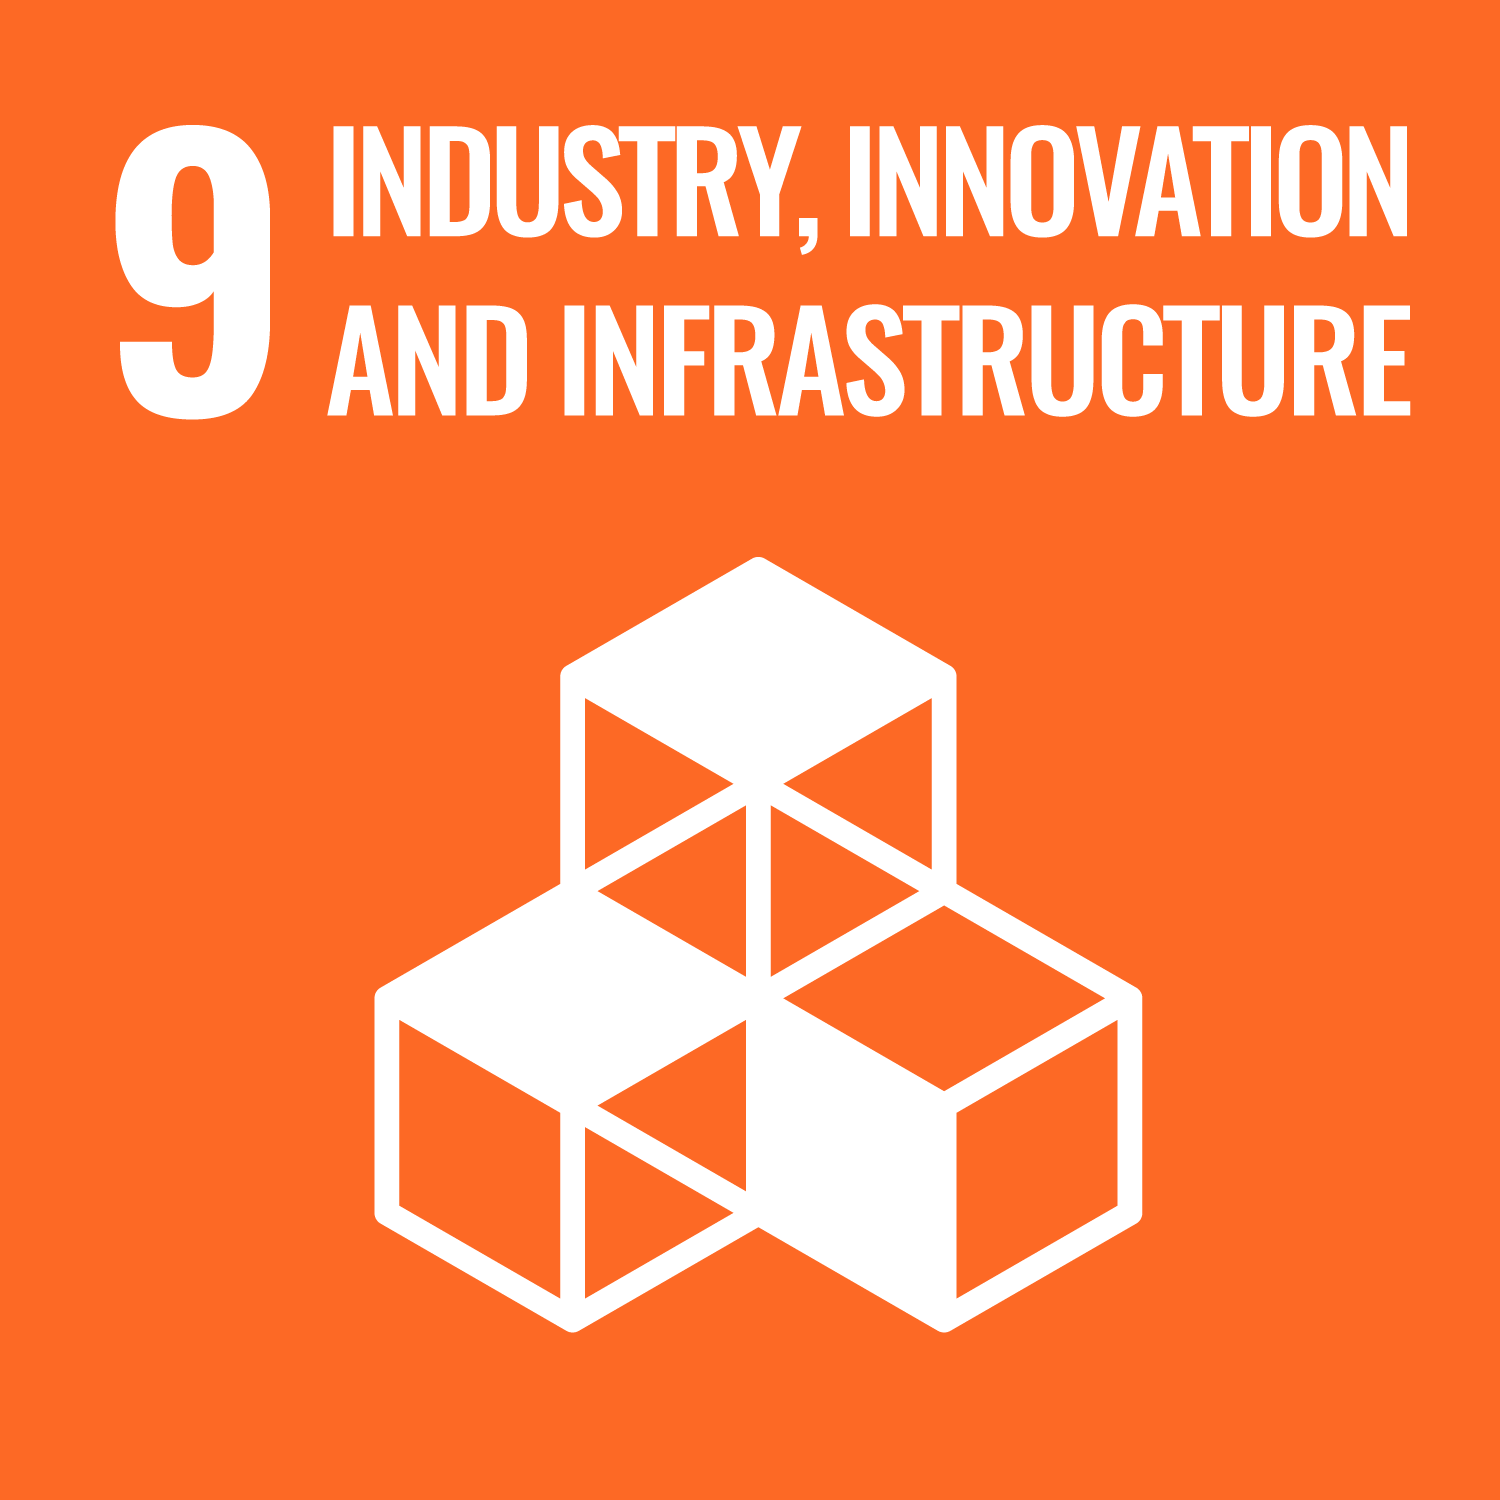 Industrialization, innovation and infrastructure